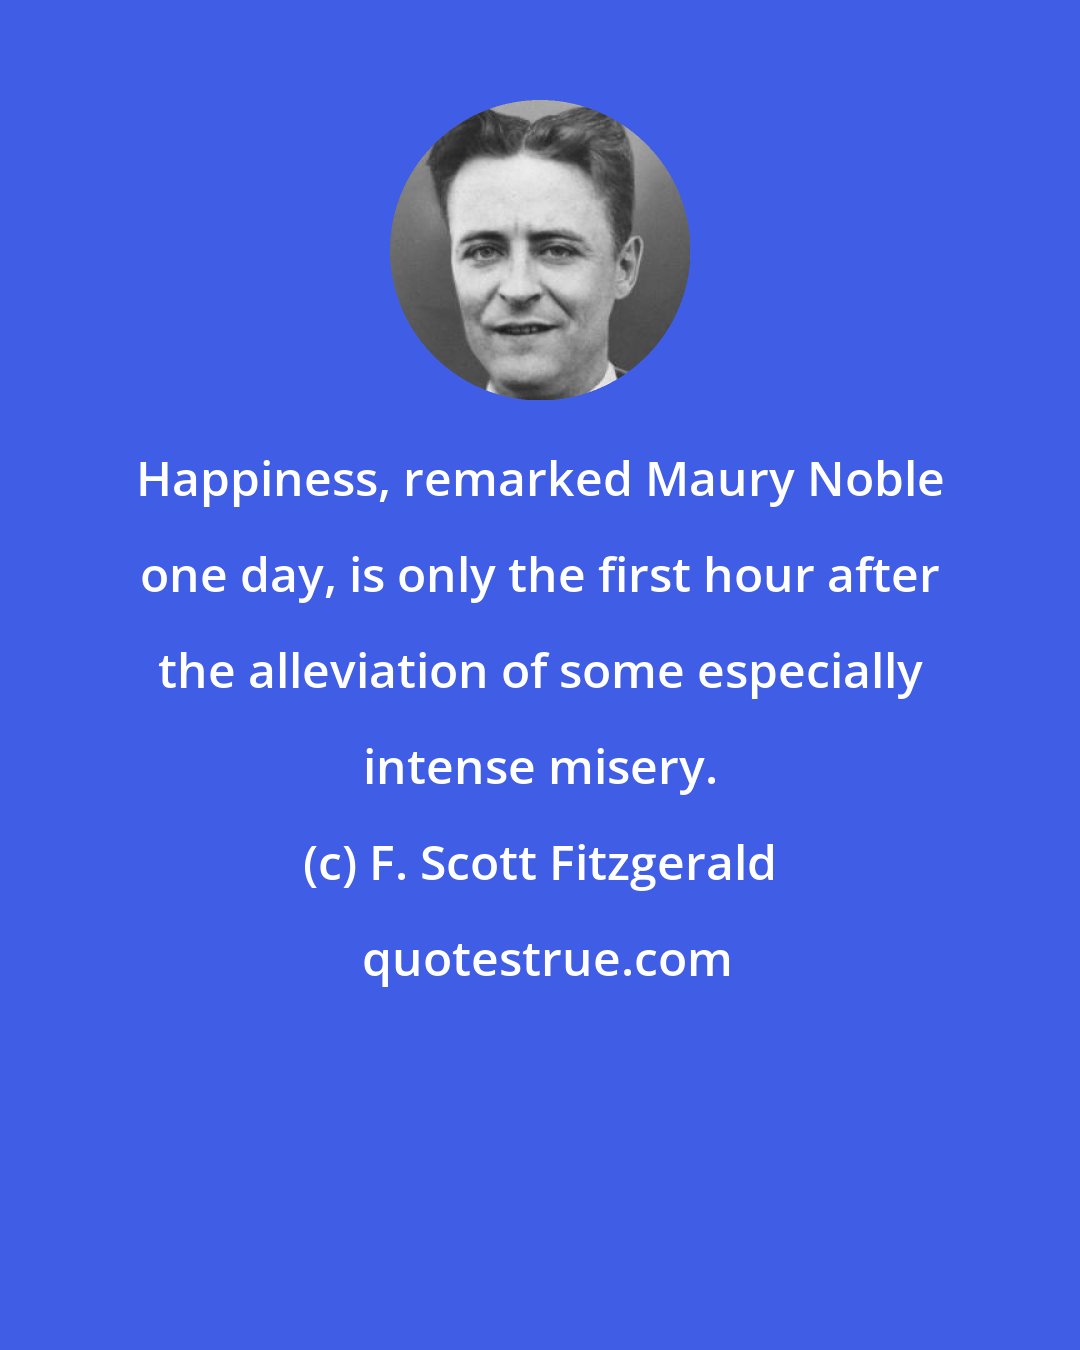 F. Scott Fitzgerald: Happiness, remarked Maury Noble one day, is only the first hour after the alleviation of some especially intense misery.